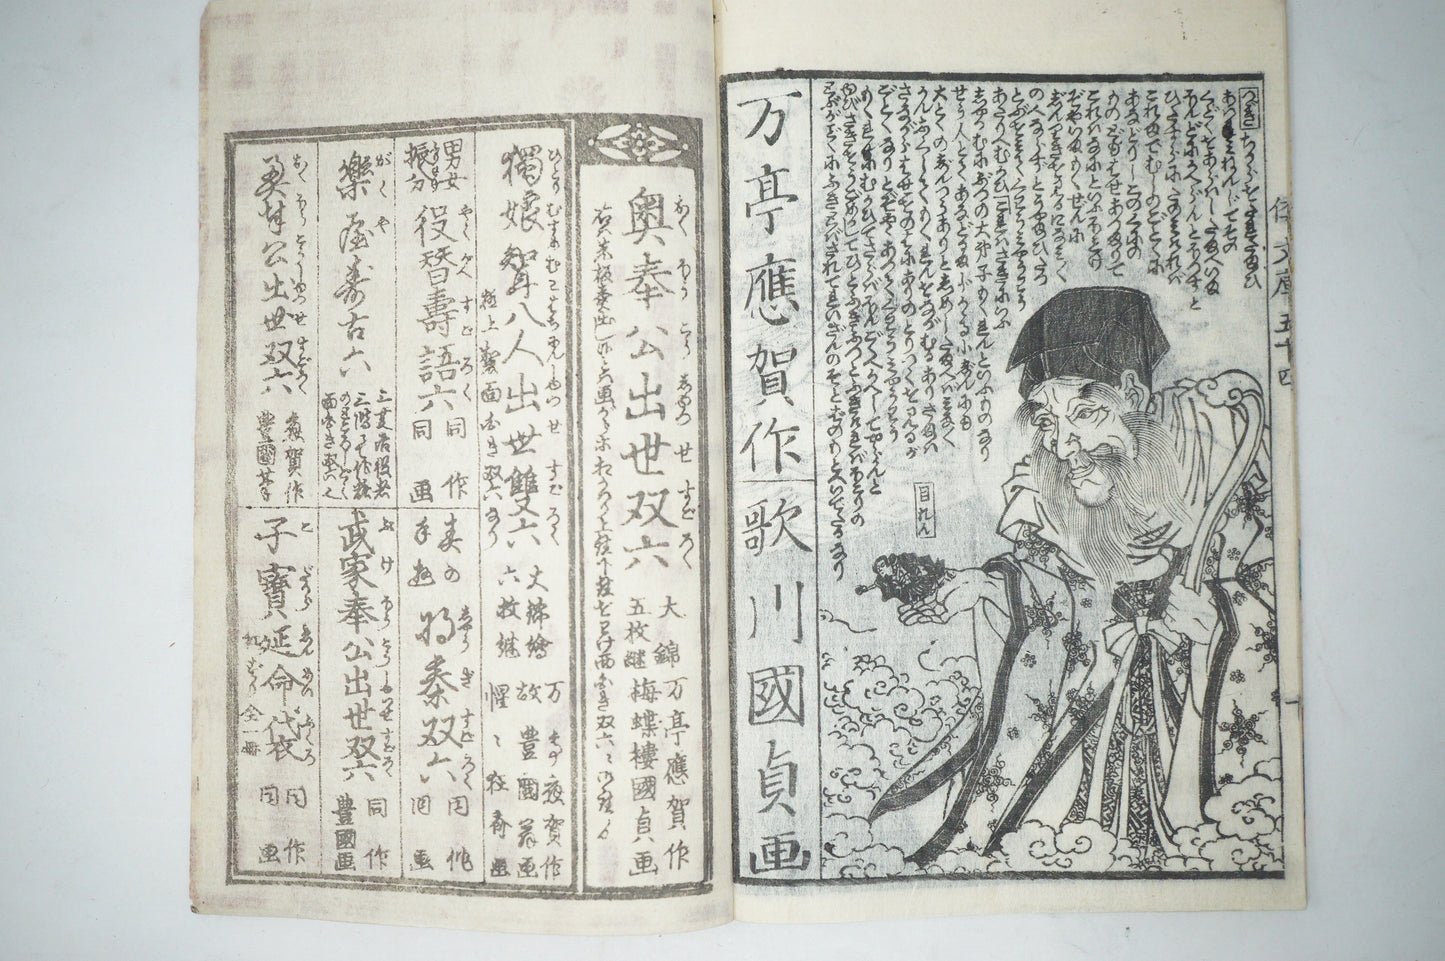 Antique Japanese Manga Book with detailed Woodblock Printed Images from Japan 0928D14